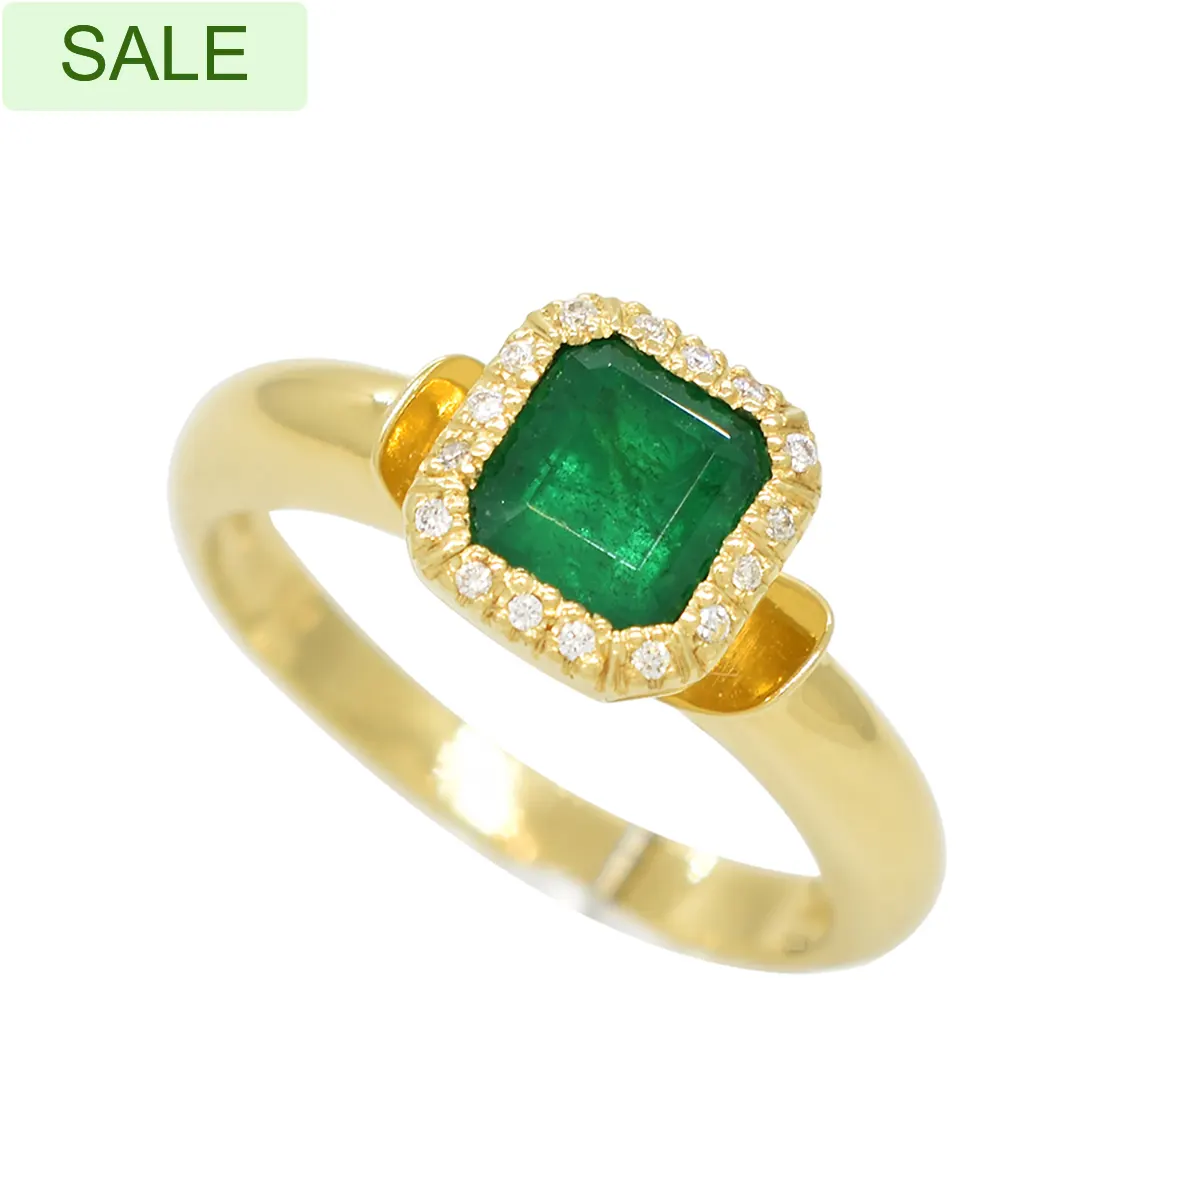 Emerald Cut Emerald in 18K Yellow Gold Ring With Diamond Halo in Bezel Setting